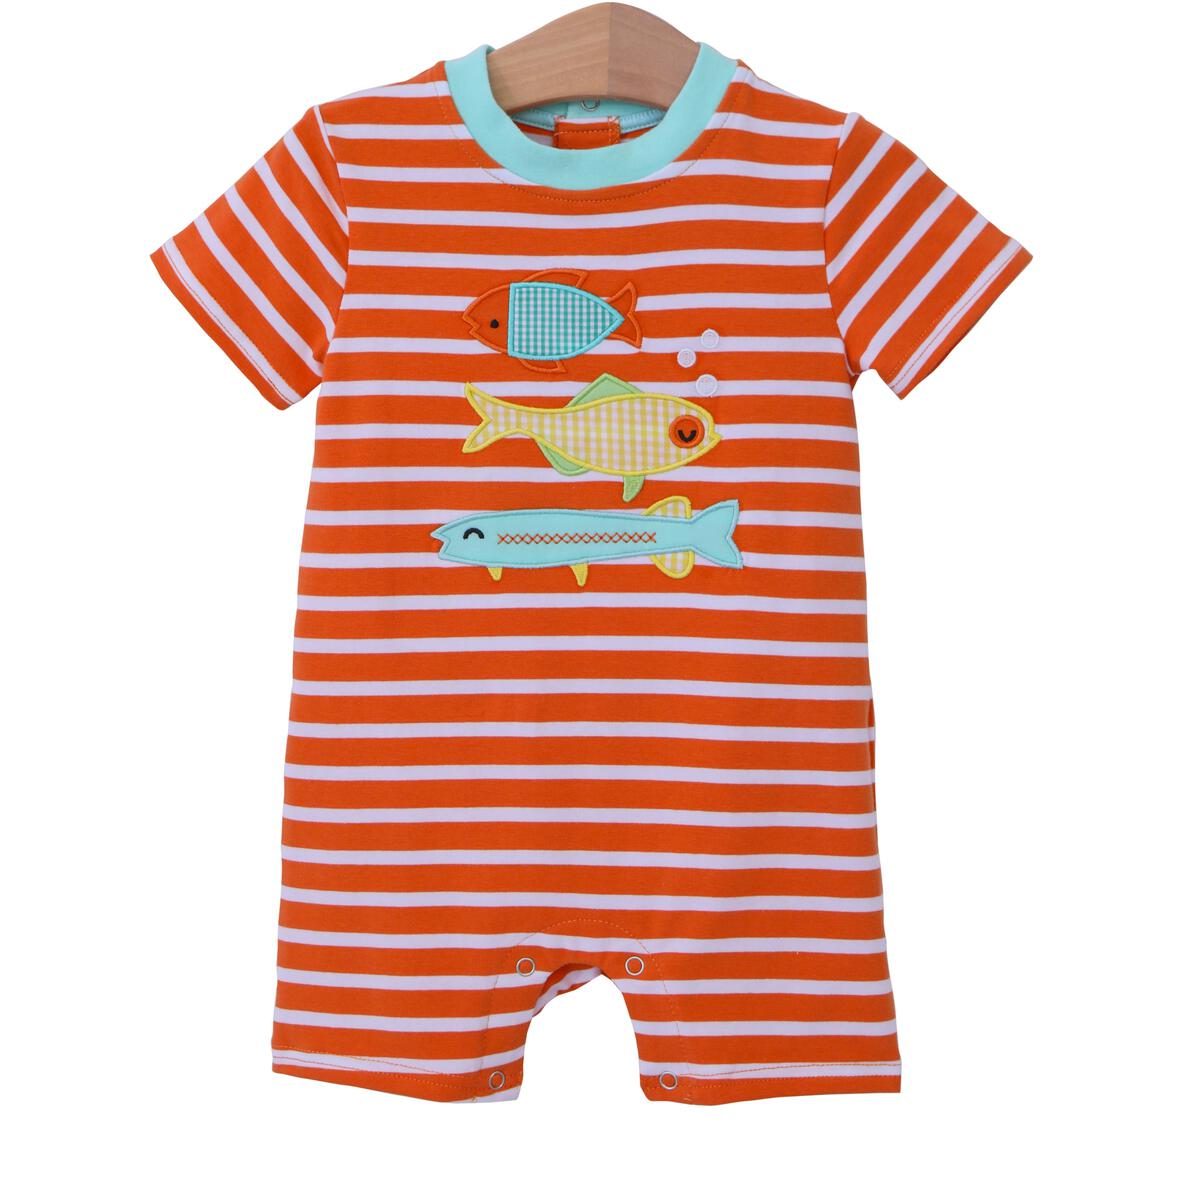 Orange and white stripe knit boy romper trimmed at the neck with a light blue and trio fish applique on the front